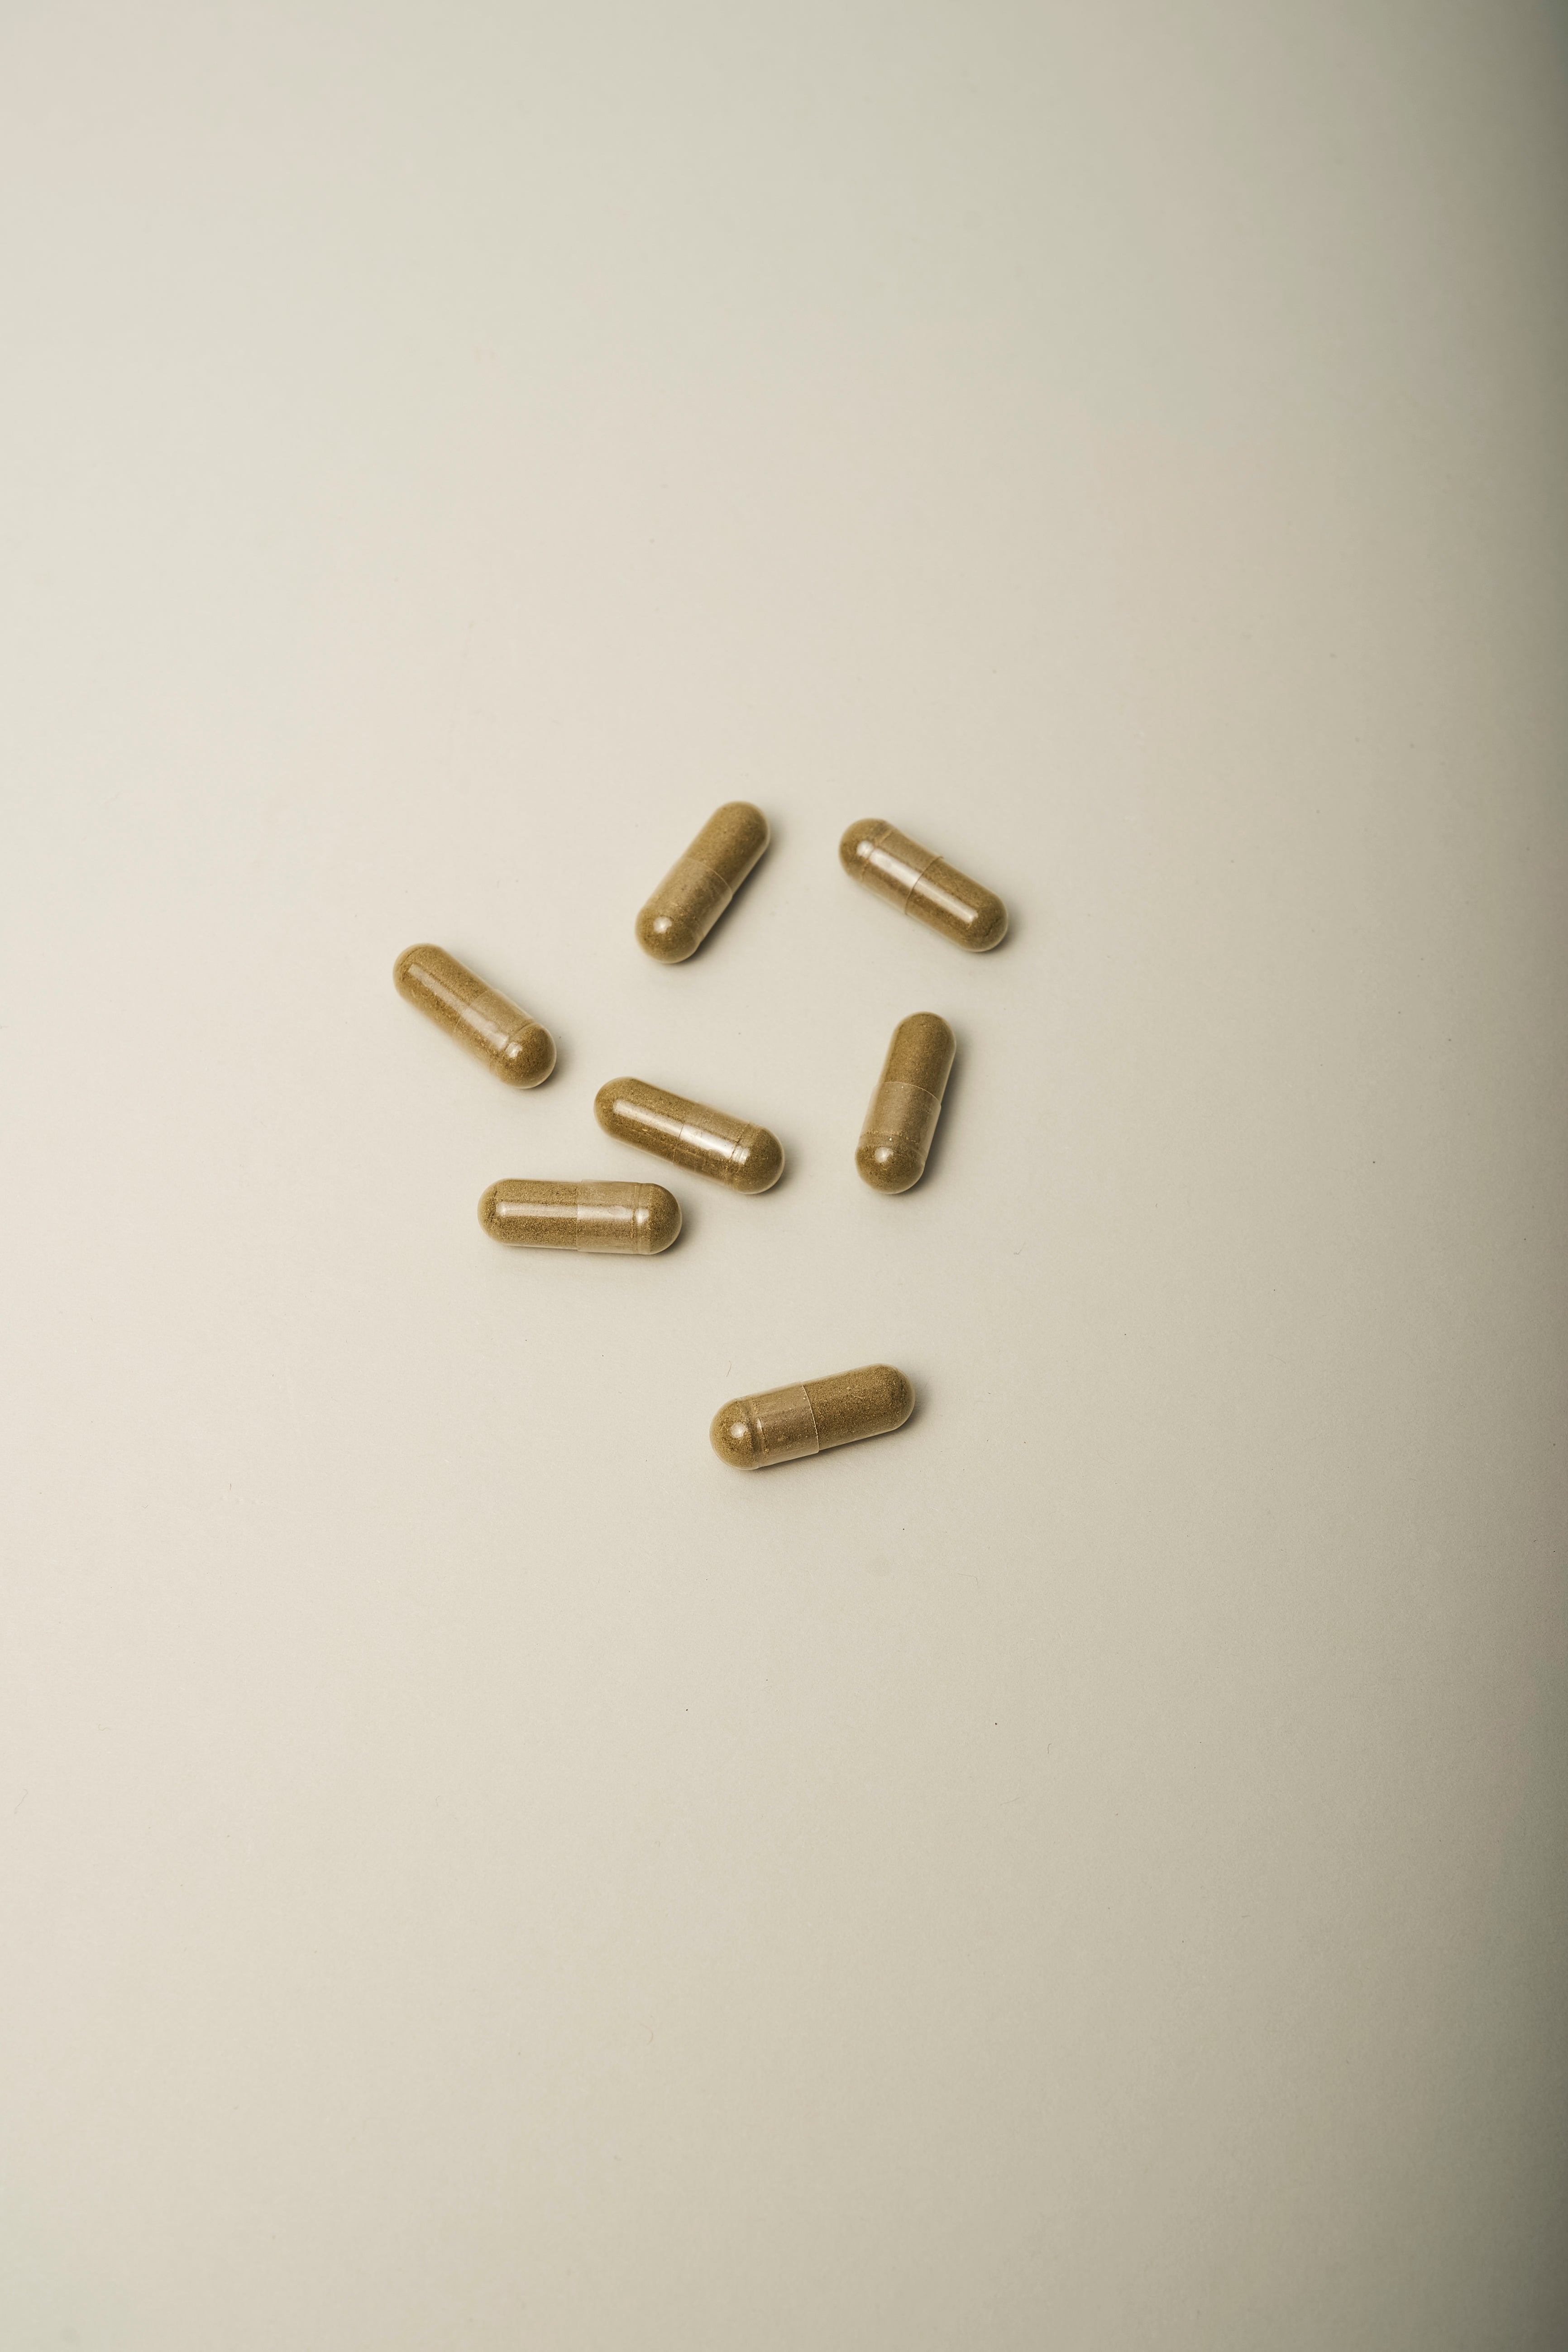 OPC capsules with Vitamin C - 60 capsules in 1 month supply